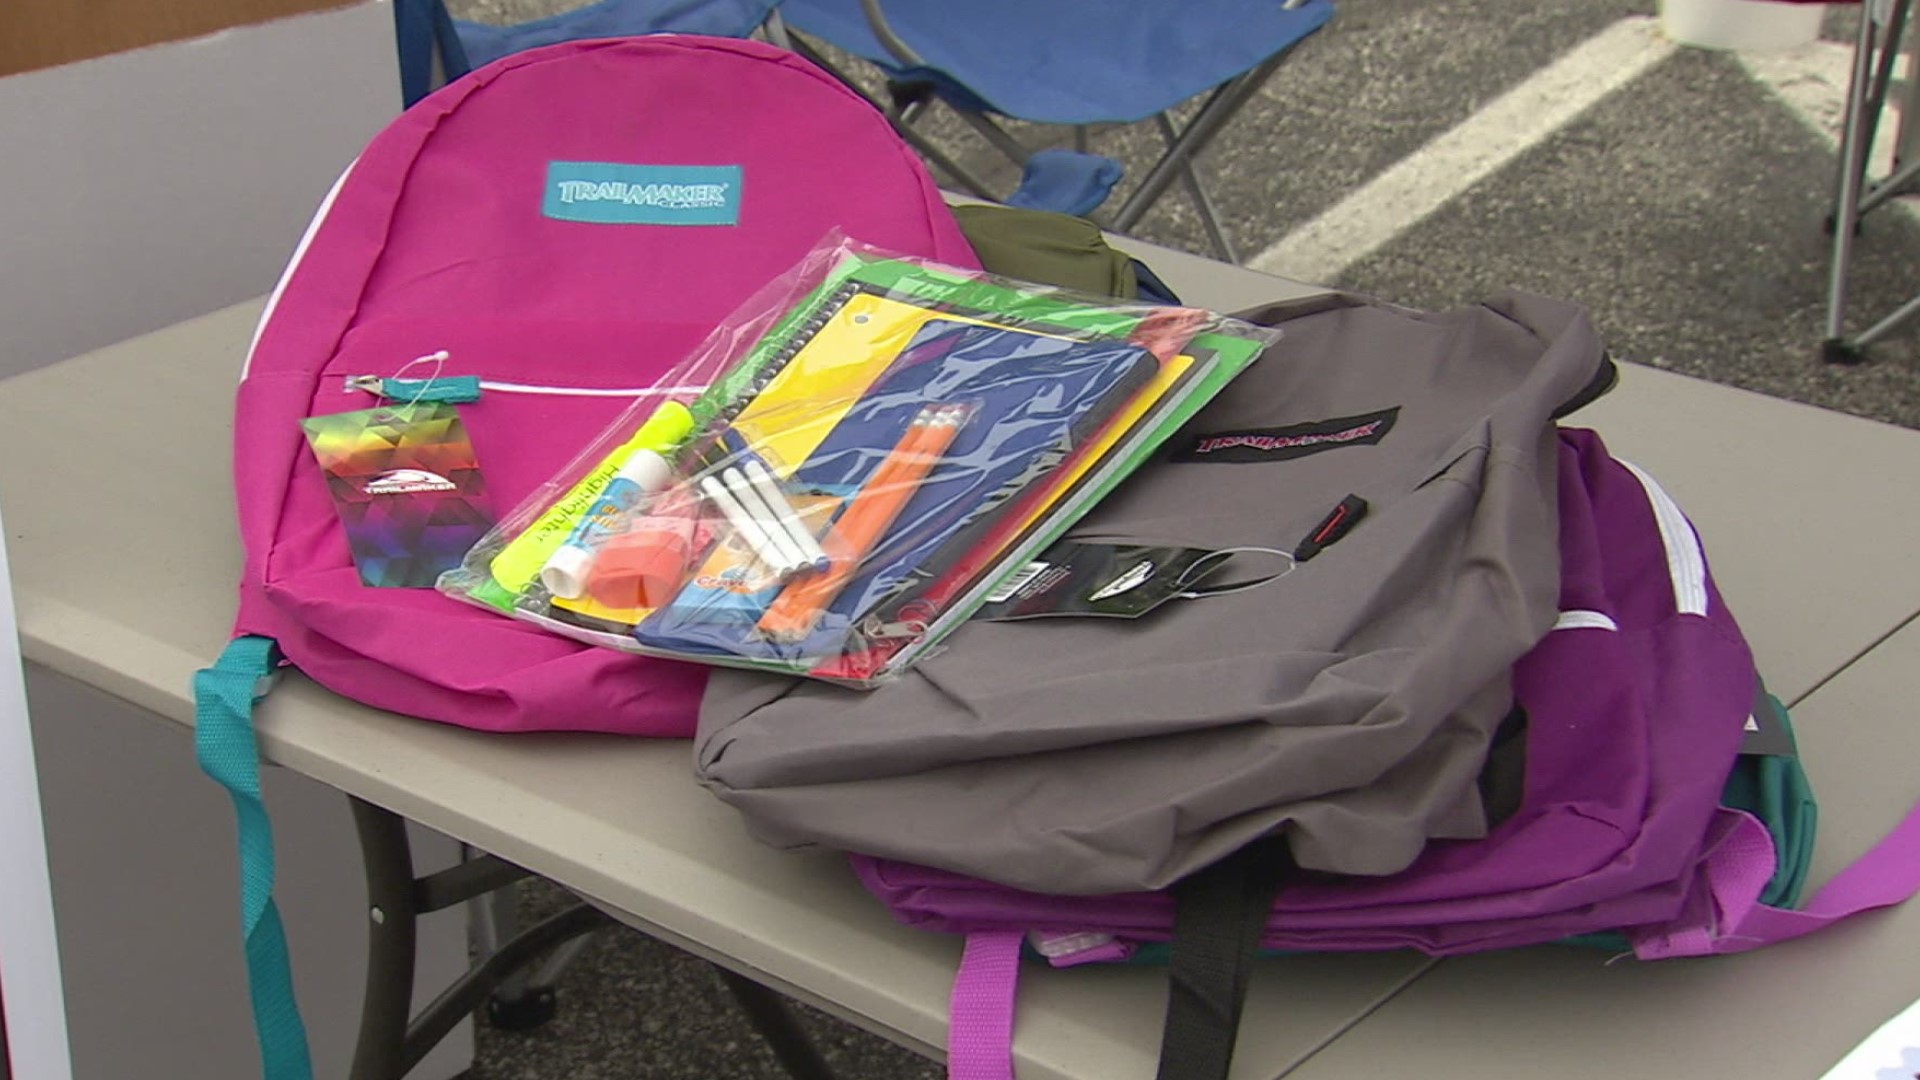 A lot of families are going to need help getting school supplies for their kids. That's why the Citywide BackPack Attack school supply drive is already underway.